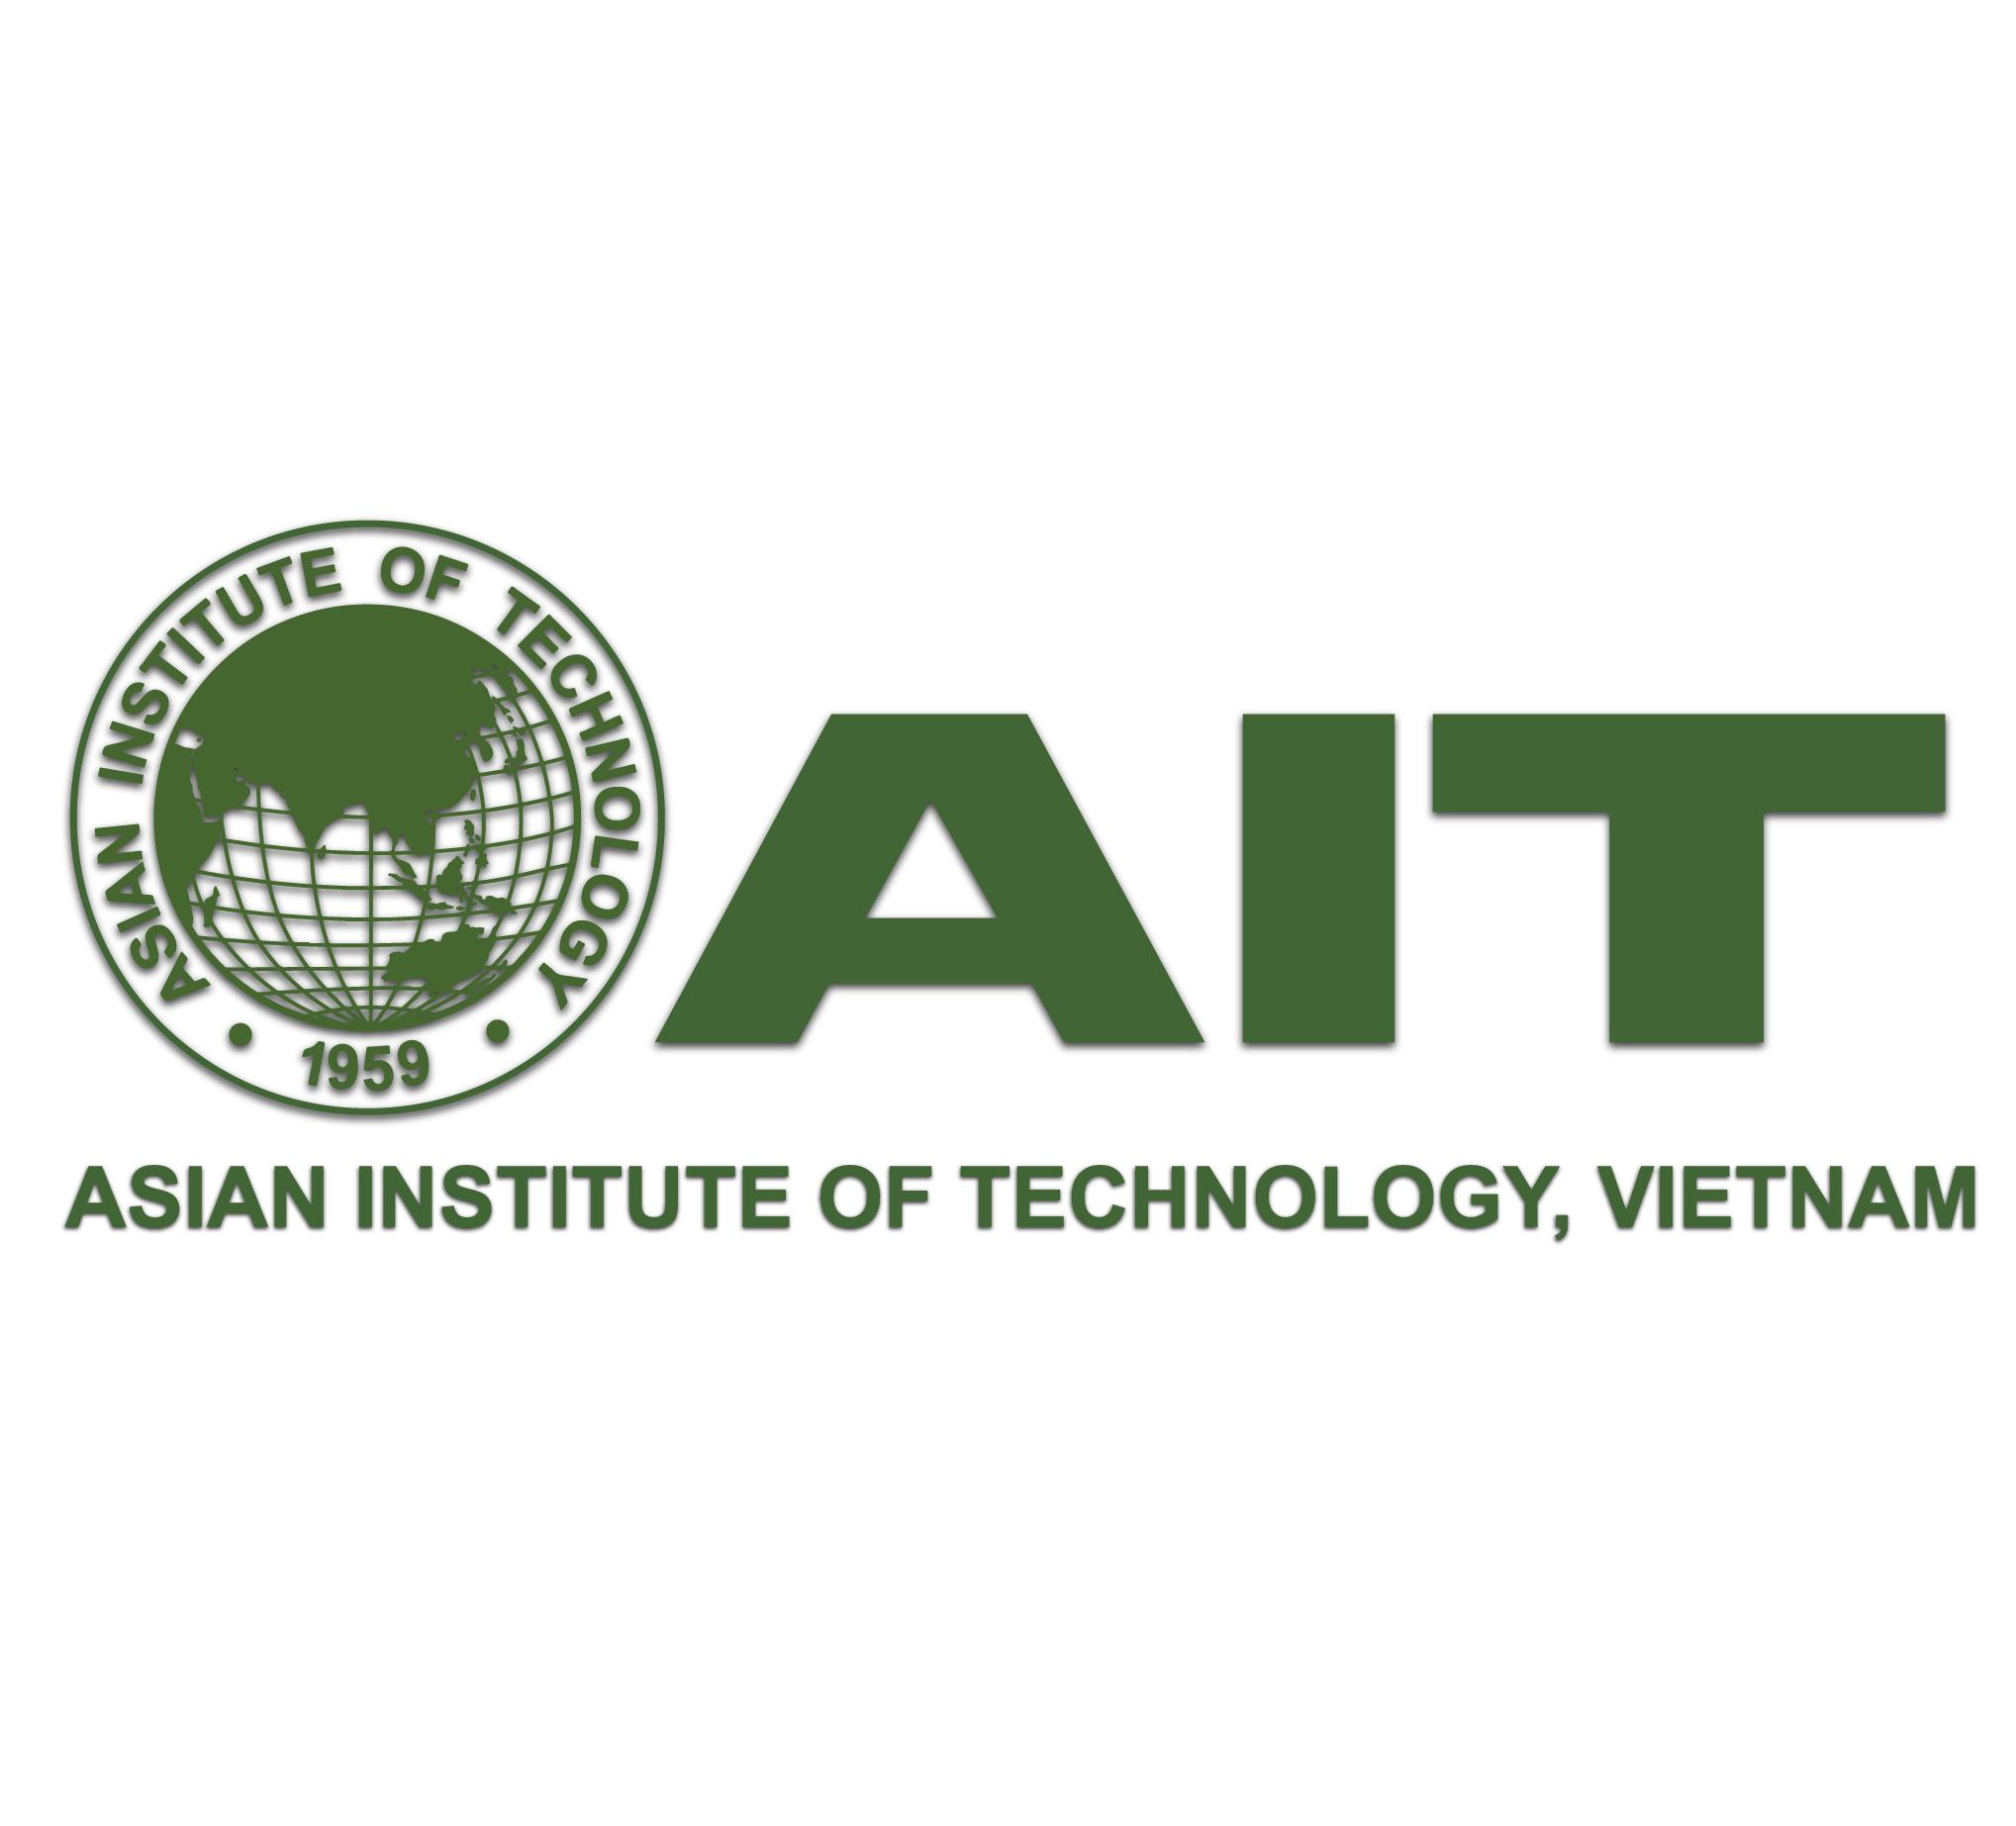 ASIAN INSTITUTE OF TECHNOLOGY IN VIETNAM